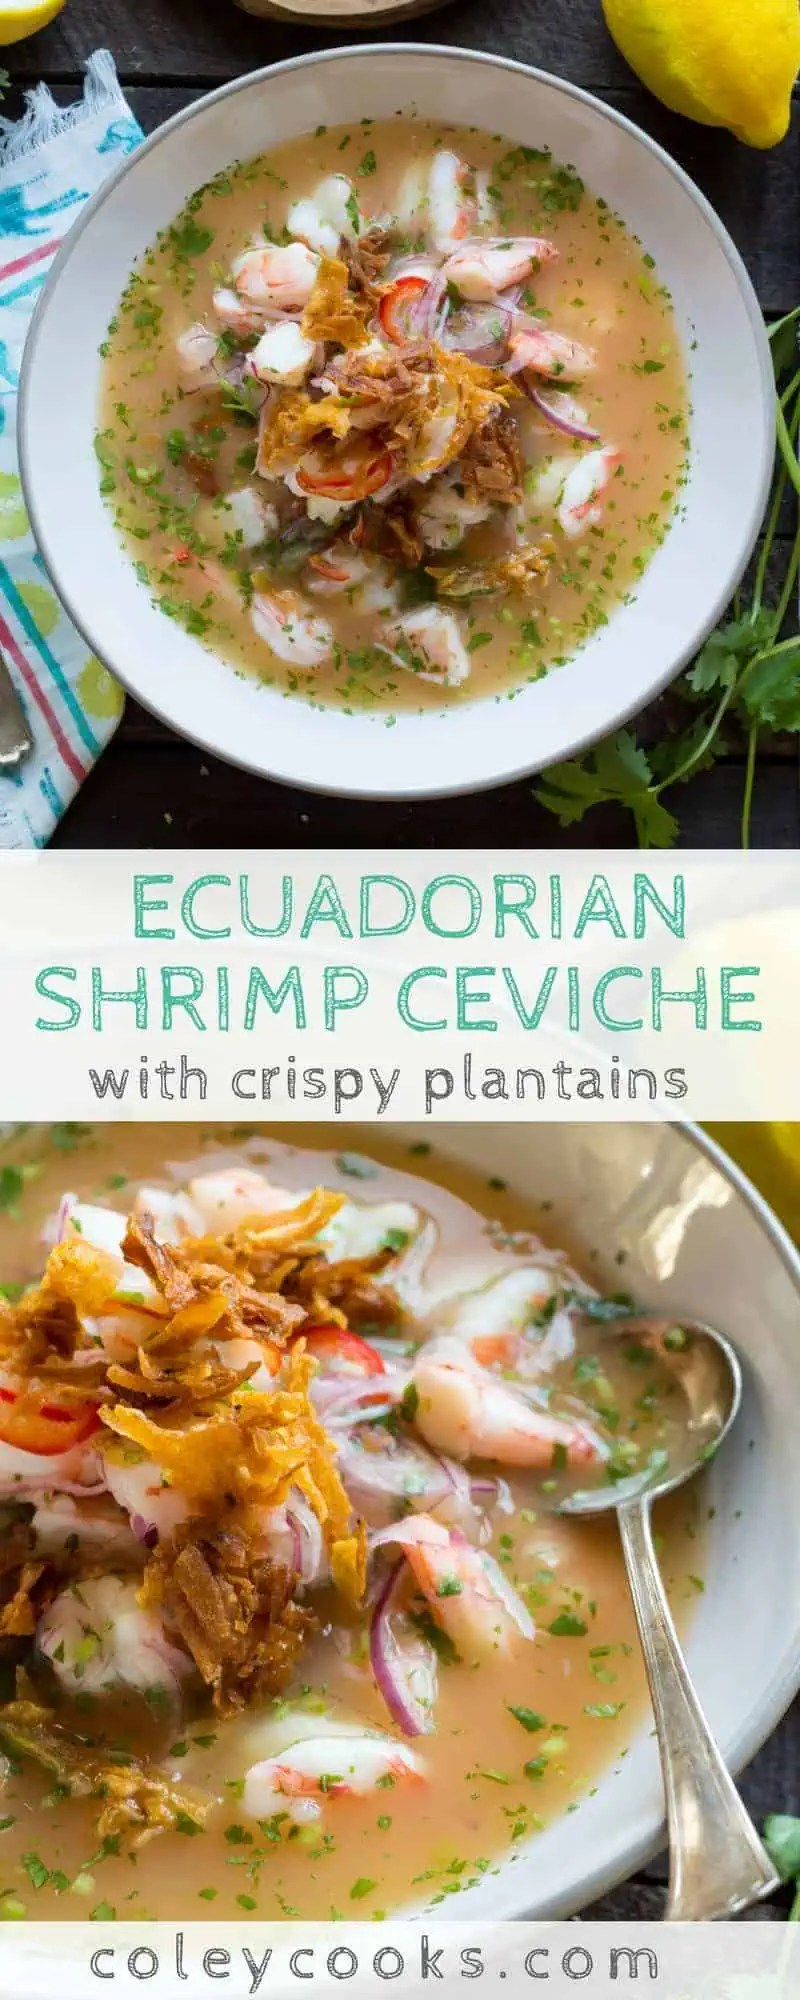 ECUADORIAN SHRIMP CEVICHE with CRISPY PLANTAINS | This easy recipe for Ecuadorian Shrimp Ceviche is light, gluten free, flavorful and refreshing! Perfect for the beach! #glutenfree | ColeyCooks.com